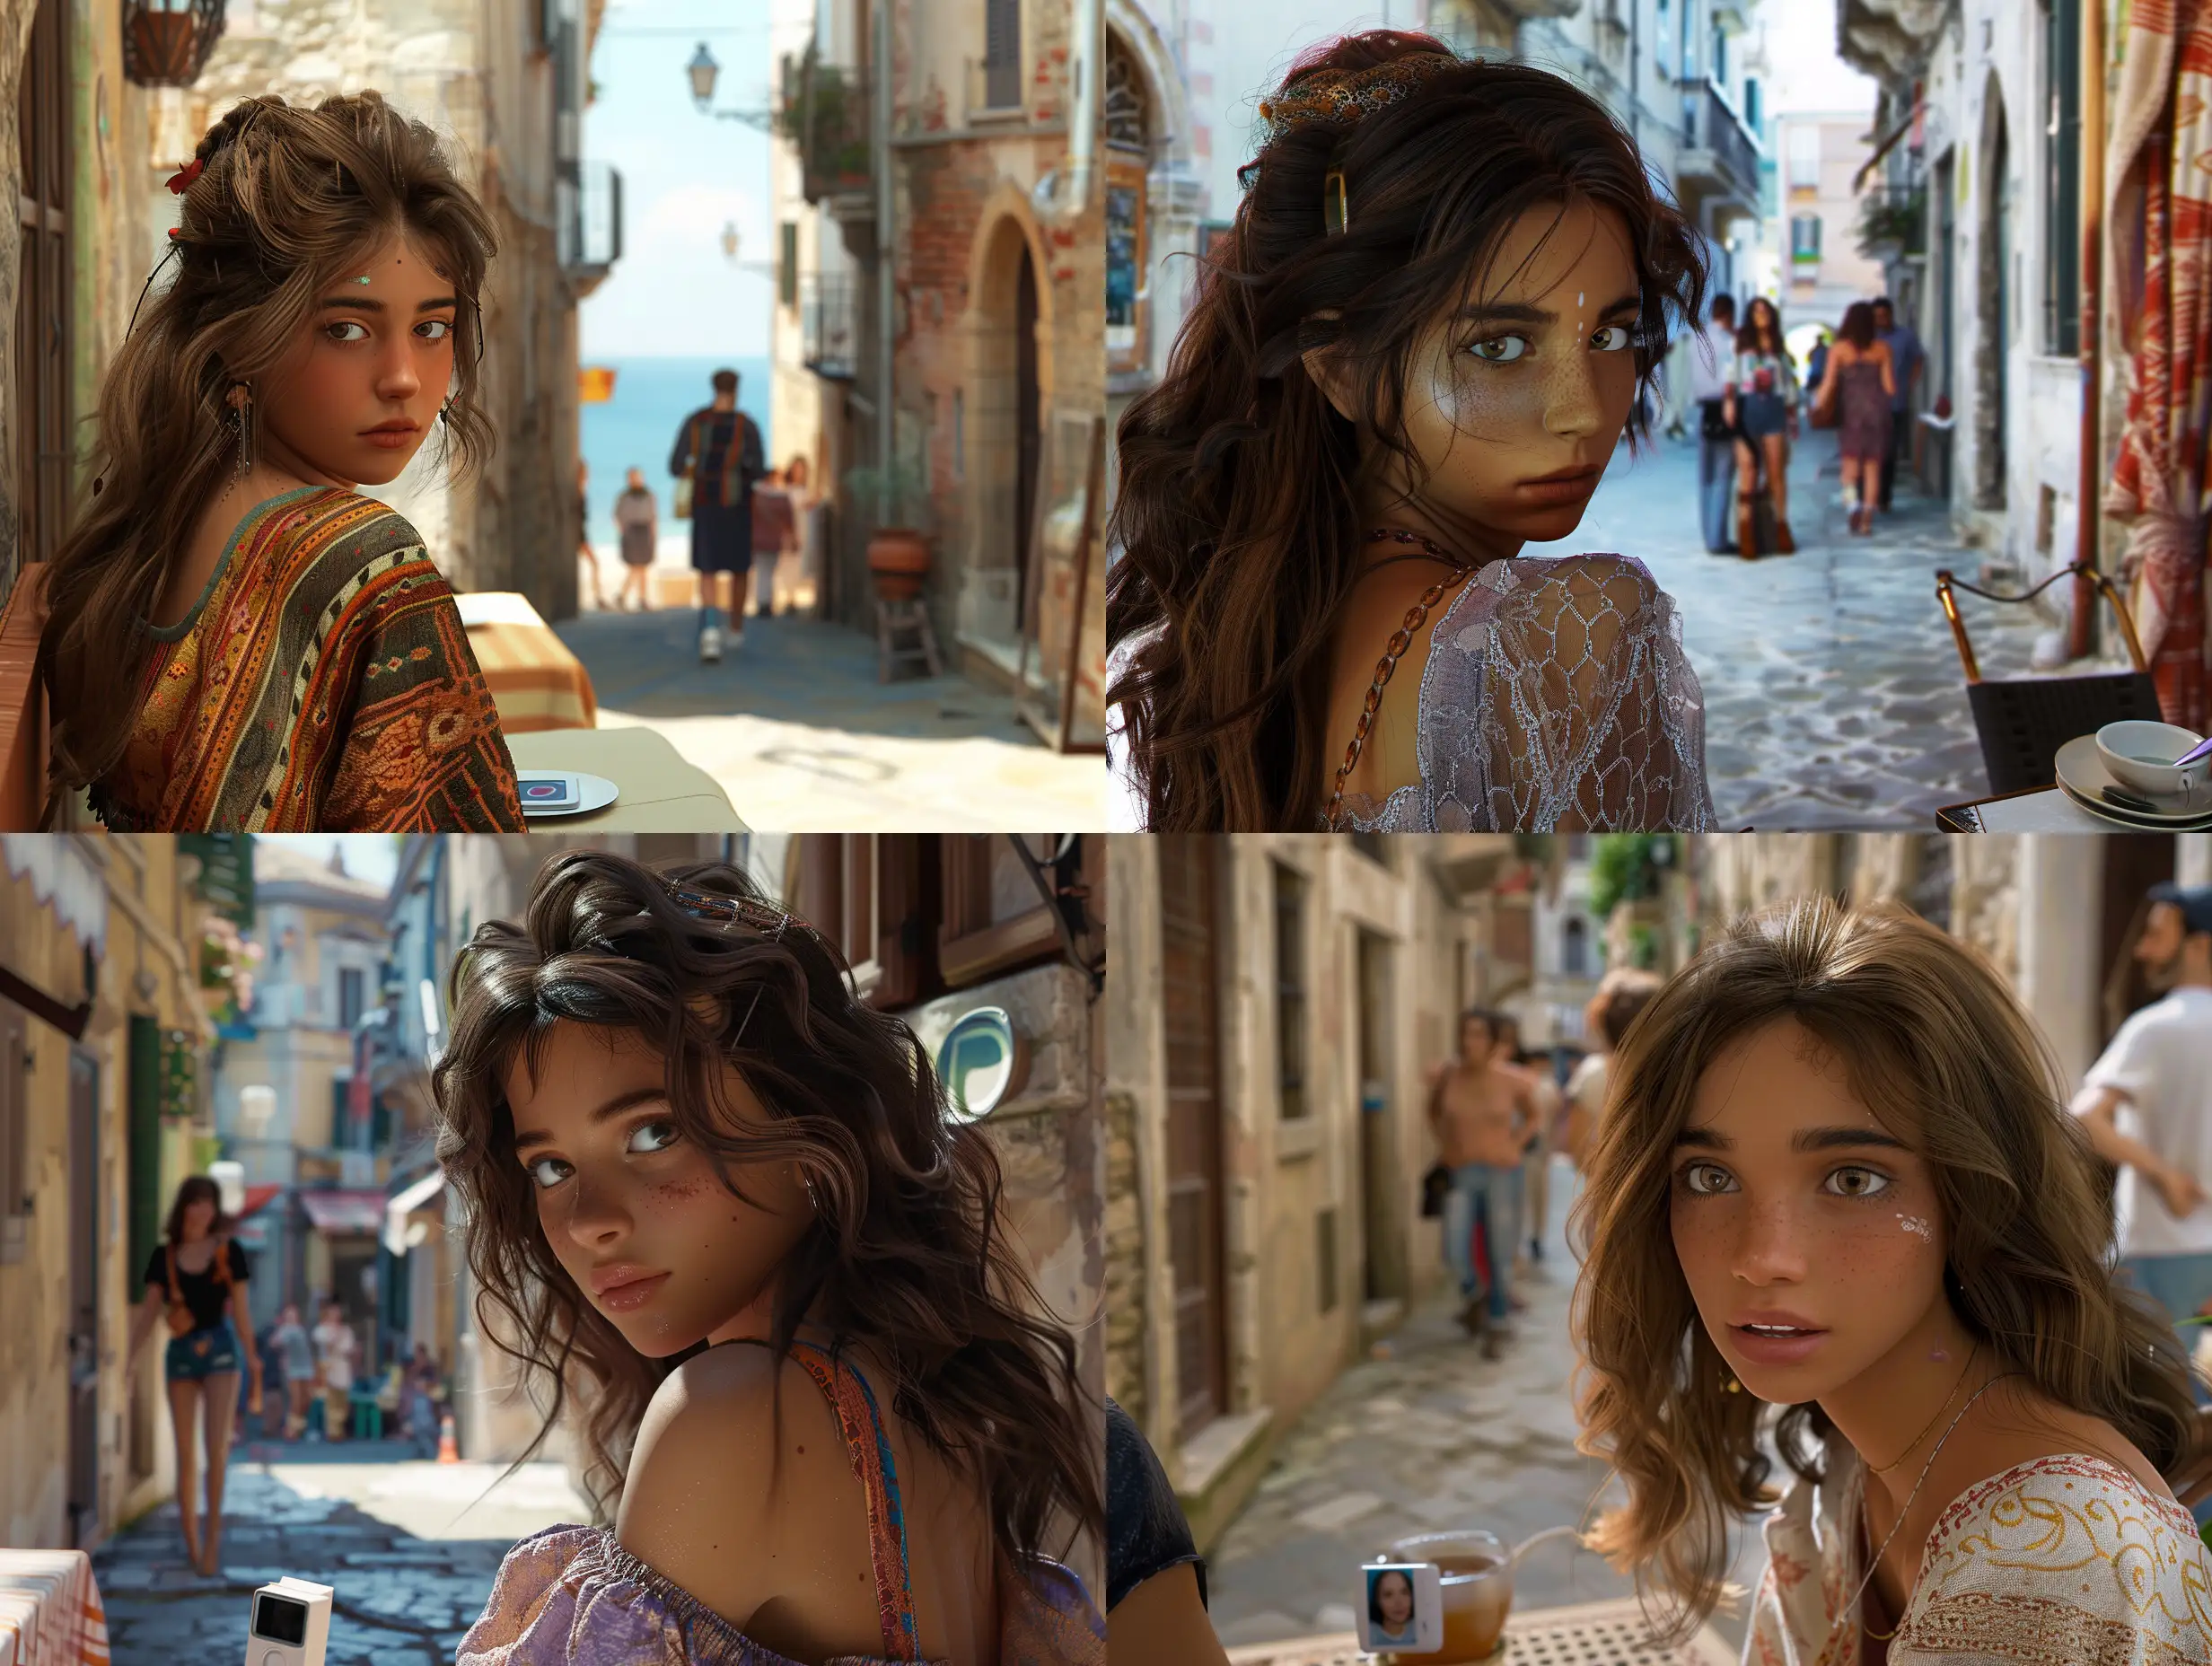 Observing-Passersby-Girl-with-Gypsy-Brown-Hair-in-Italian-Cafe-Alley